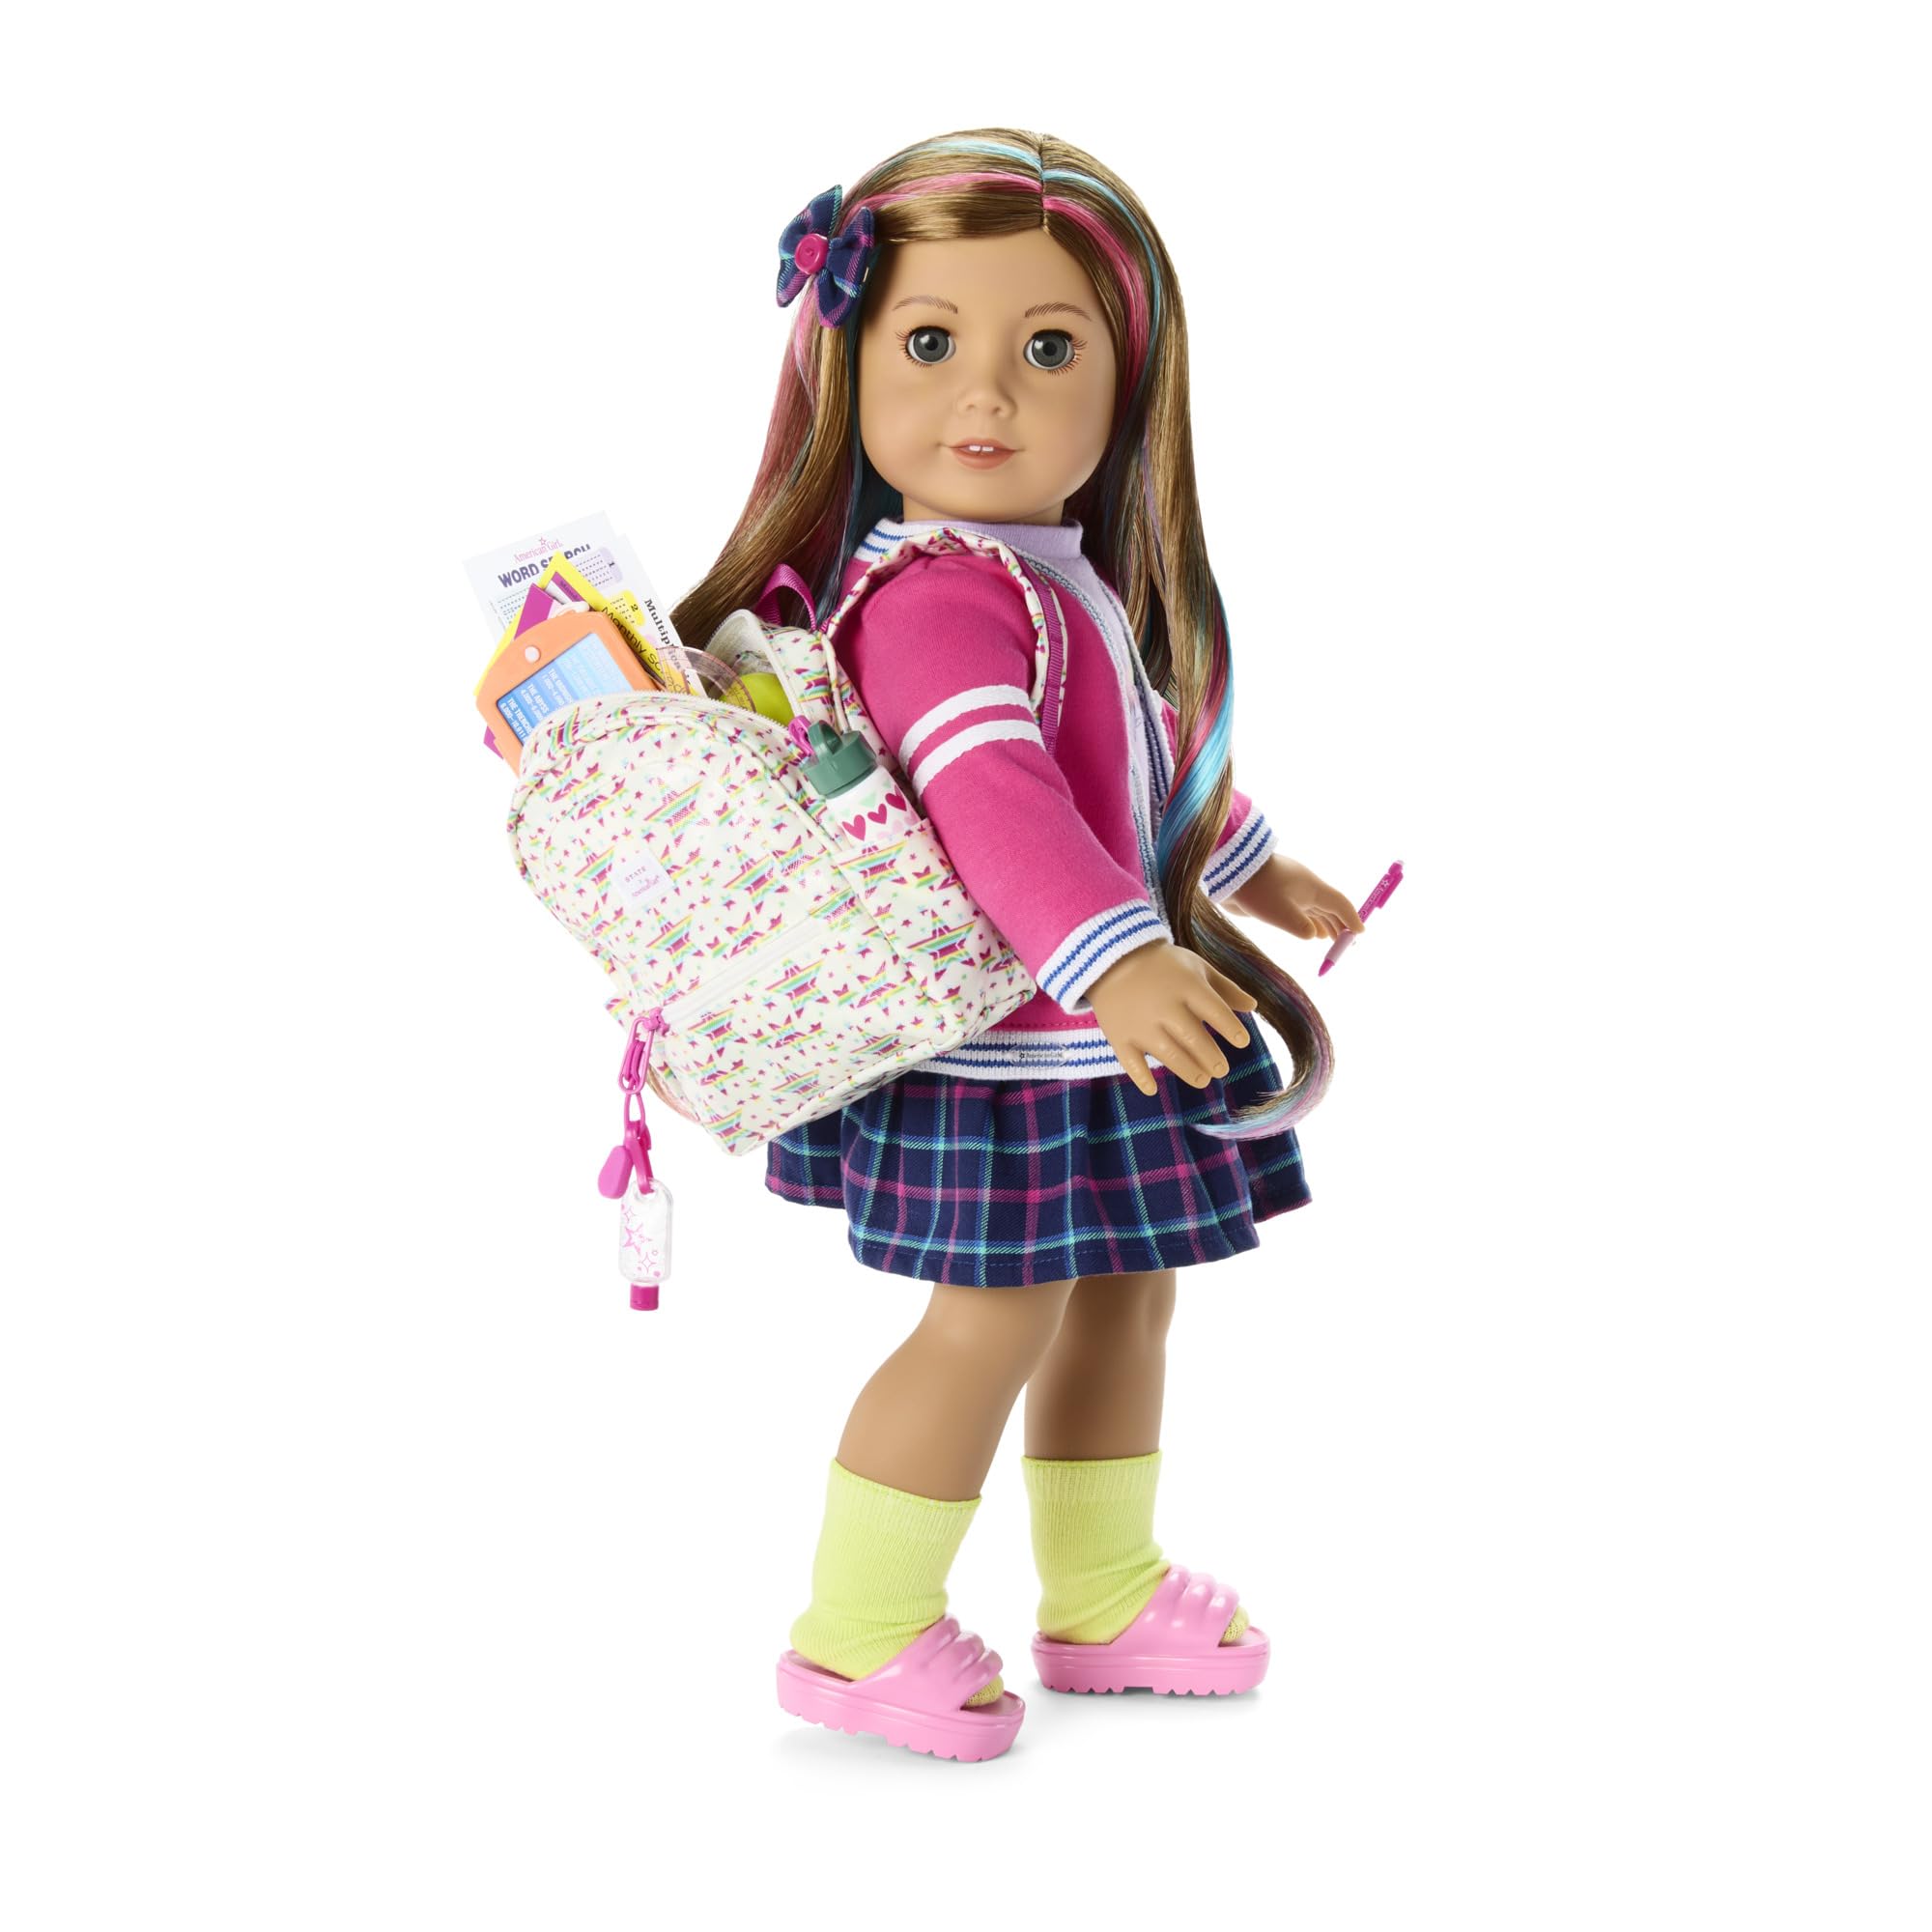 American Girl Truly Me Star Student 8-piece Backpack Set for 18-inch Dolls with rainbow star-print x STATE Bags backpack, padded shoulder straps, school accessories Ages 6+